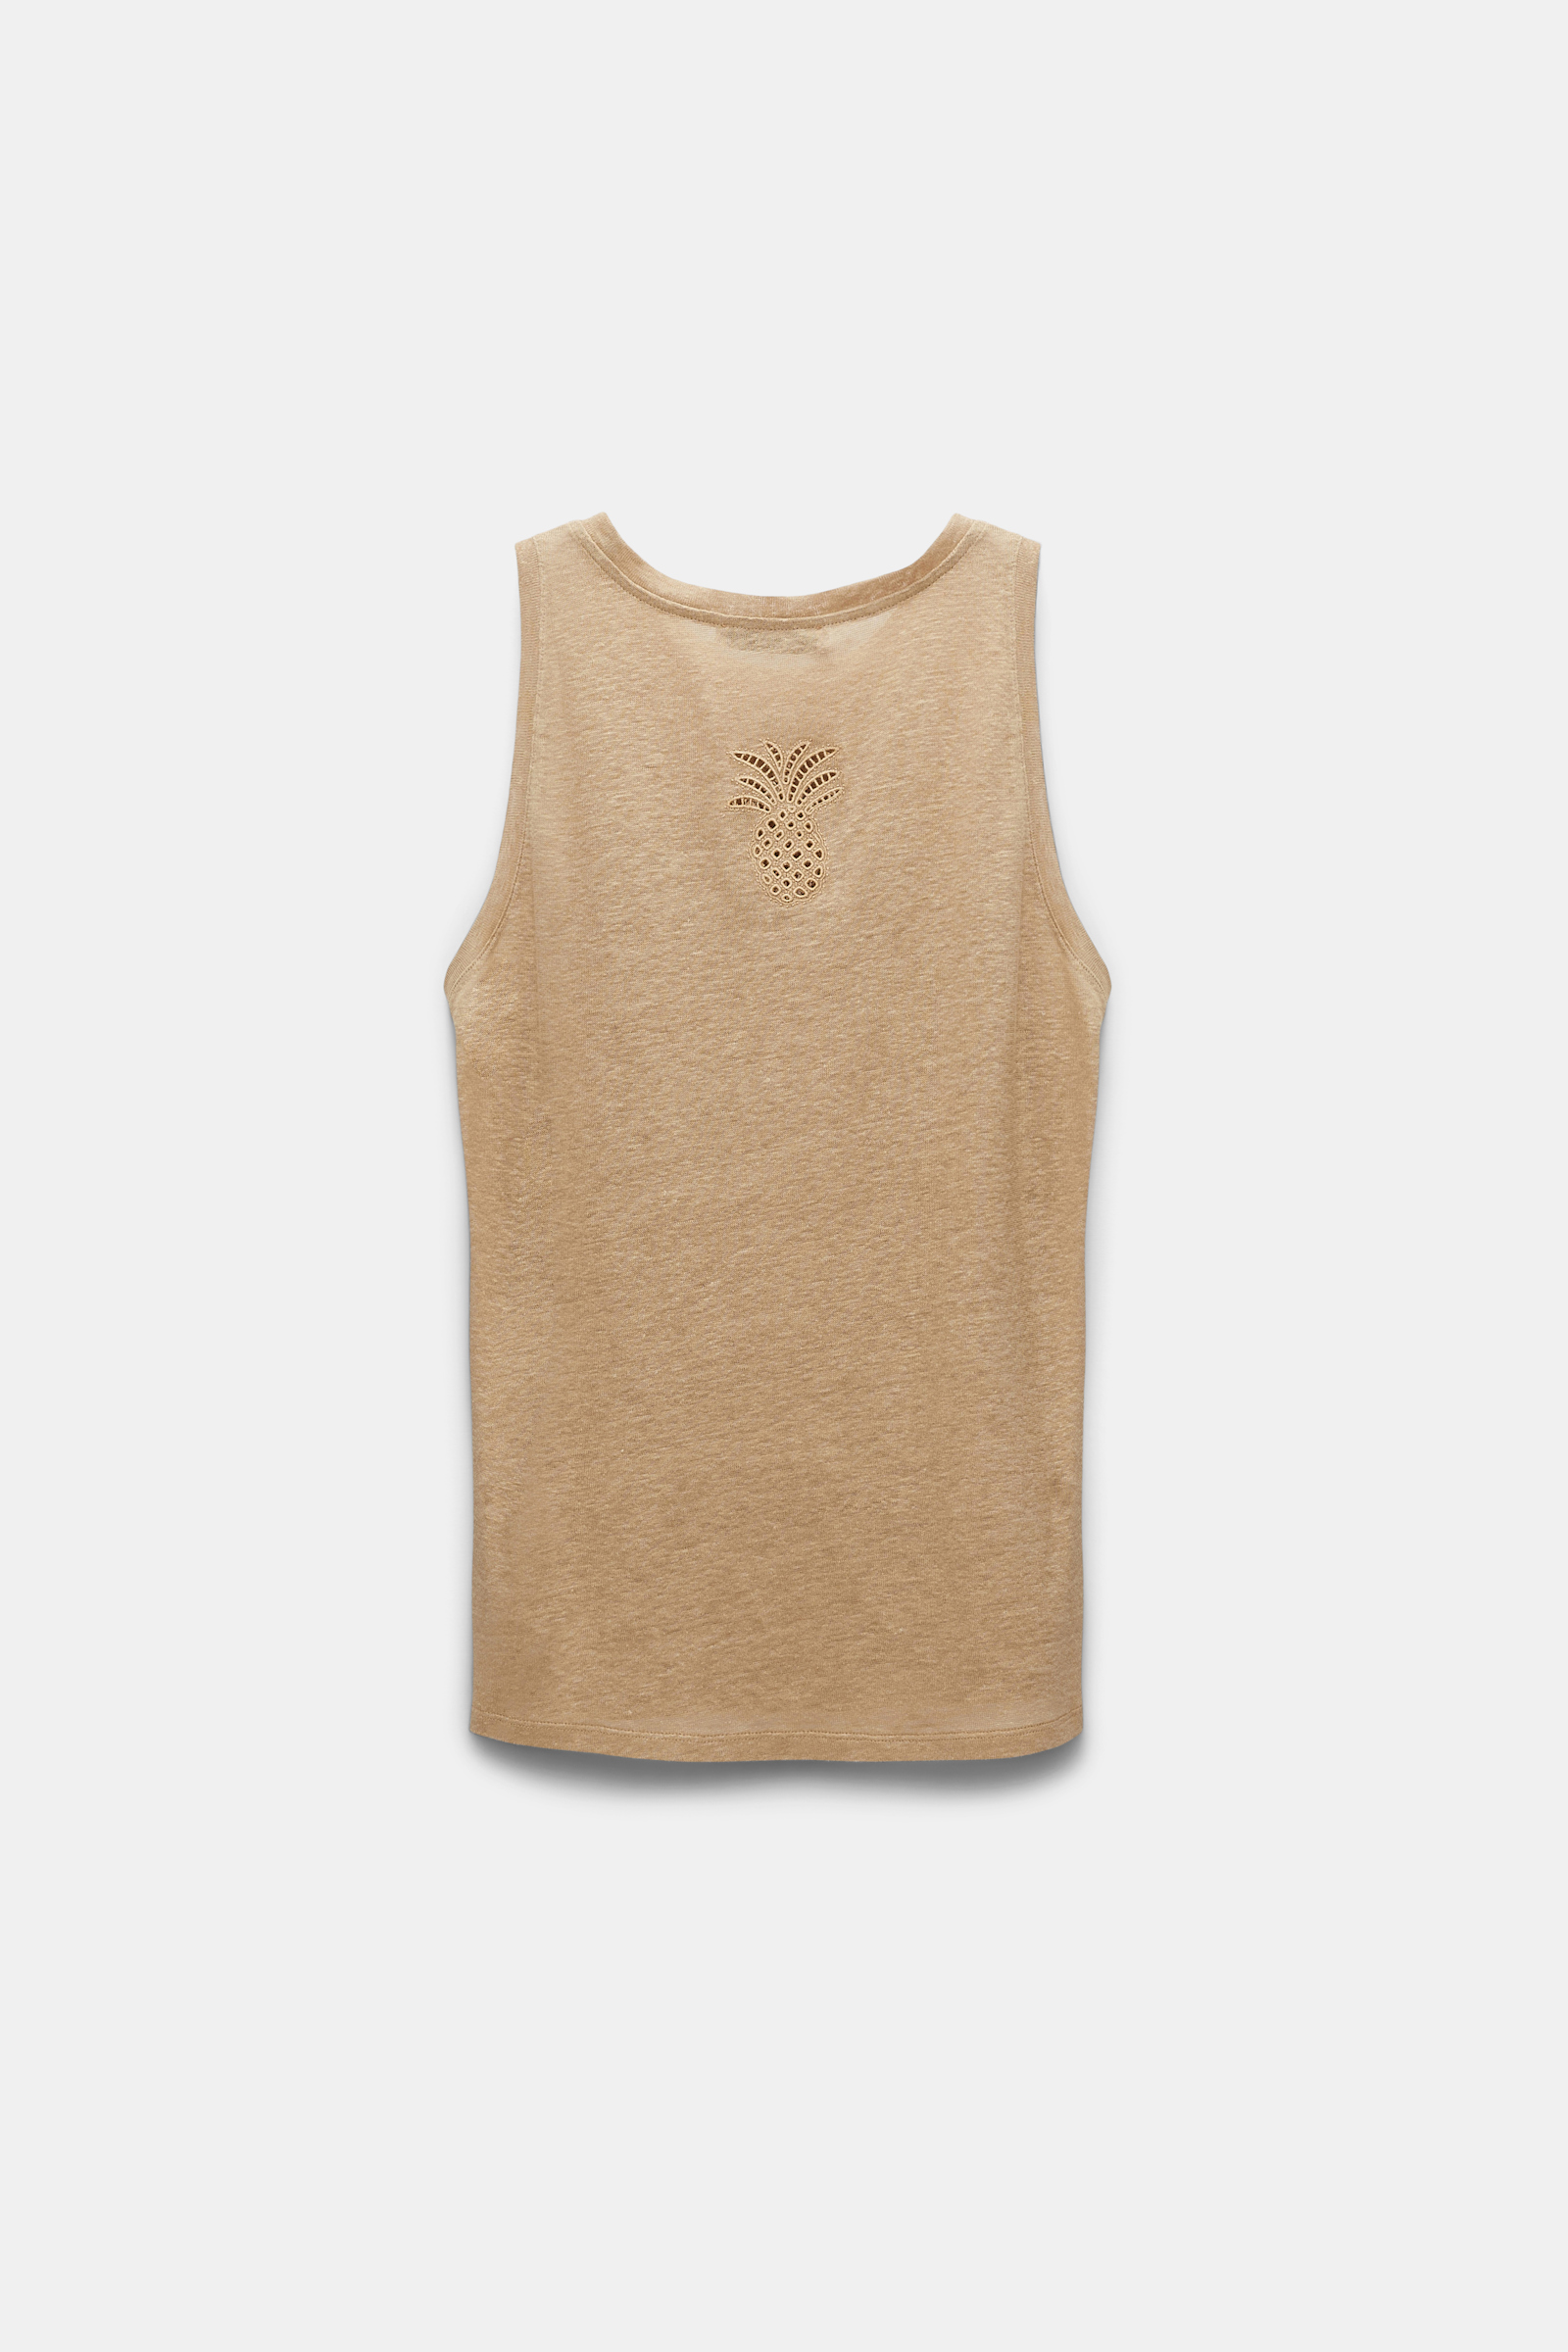 Dorothee Schumacher Hemp tank top with pineapple embroidery at the nape shimmering gold